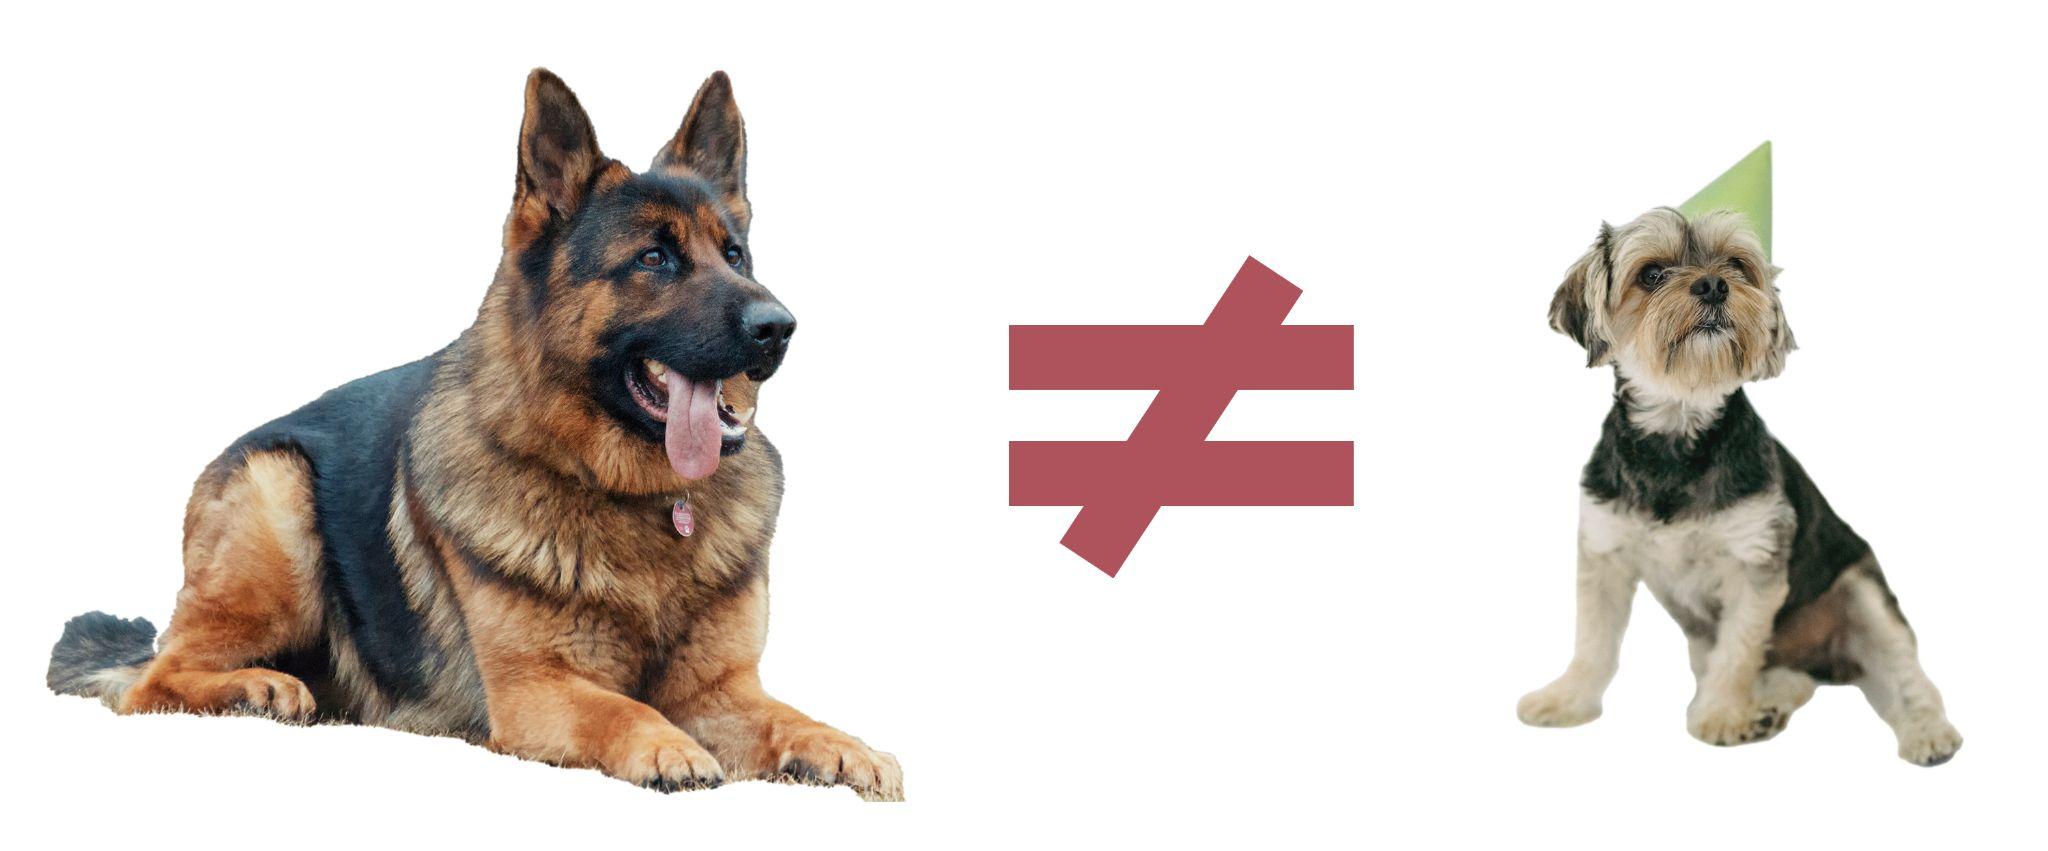 Image of two different kinds of dog breeds with a “not equal to” sign between them.